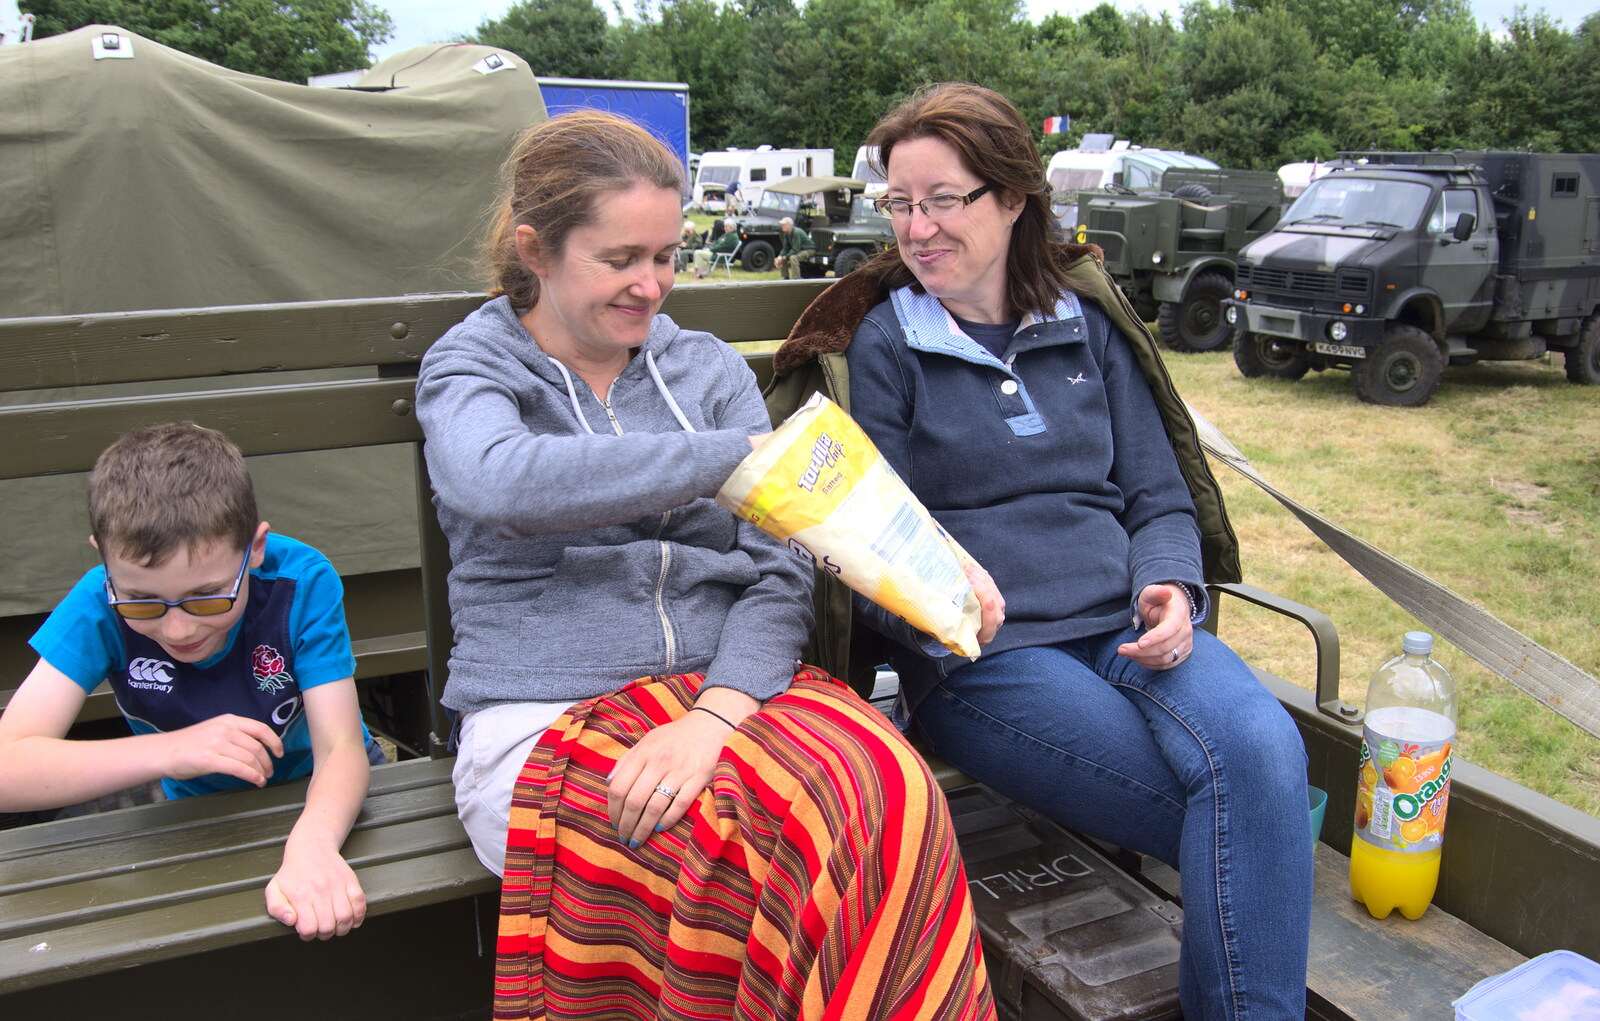 Isobel and Suzanne share some tortilla chips from The Formerly-Known-As-The-Eye-Show, Palgrave, Suffolk - 17th June 2018